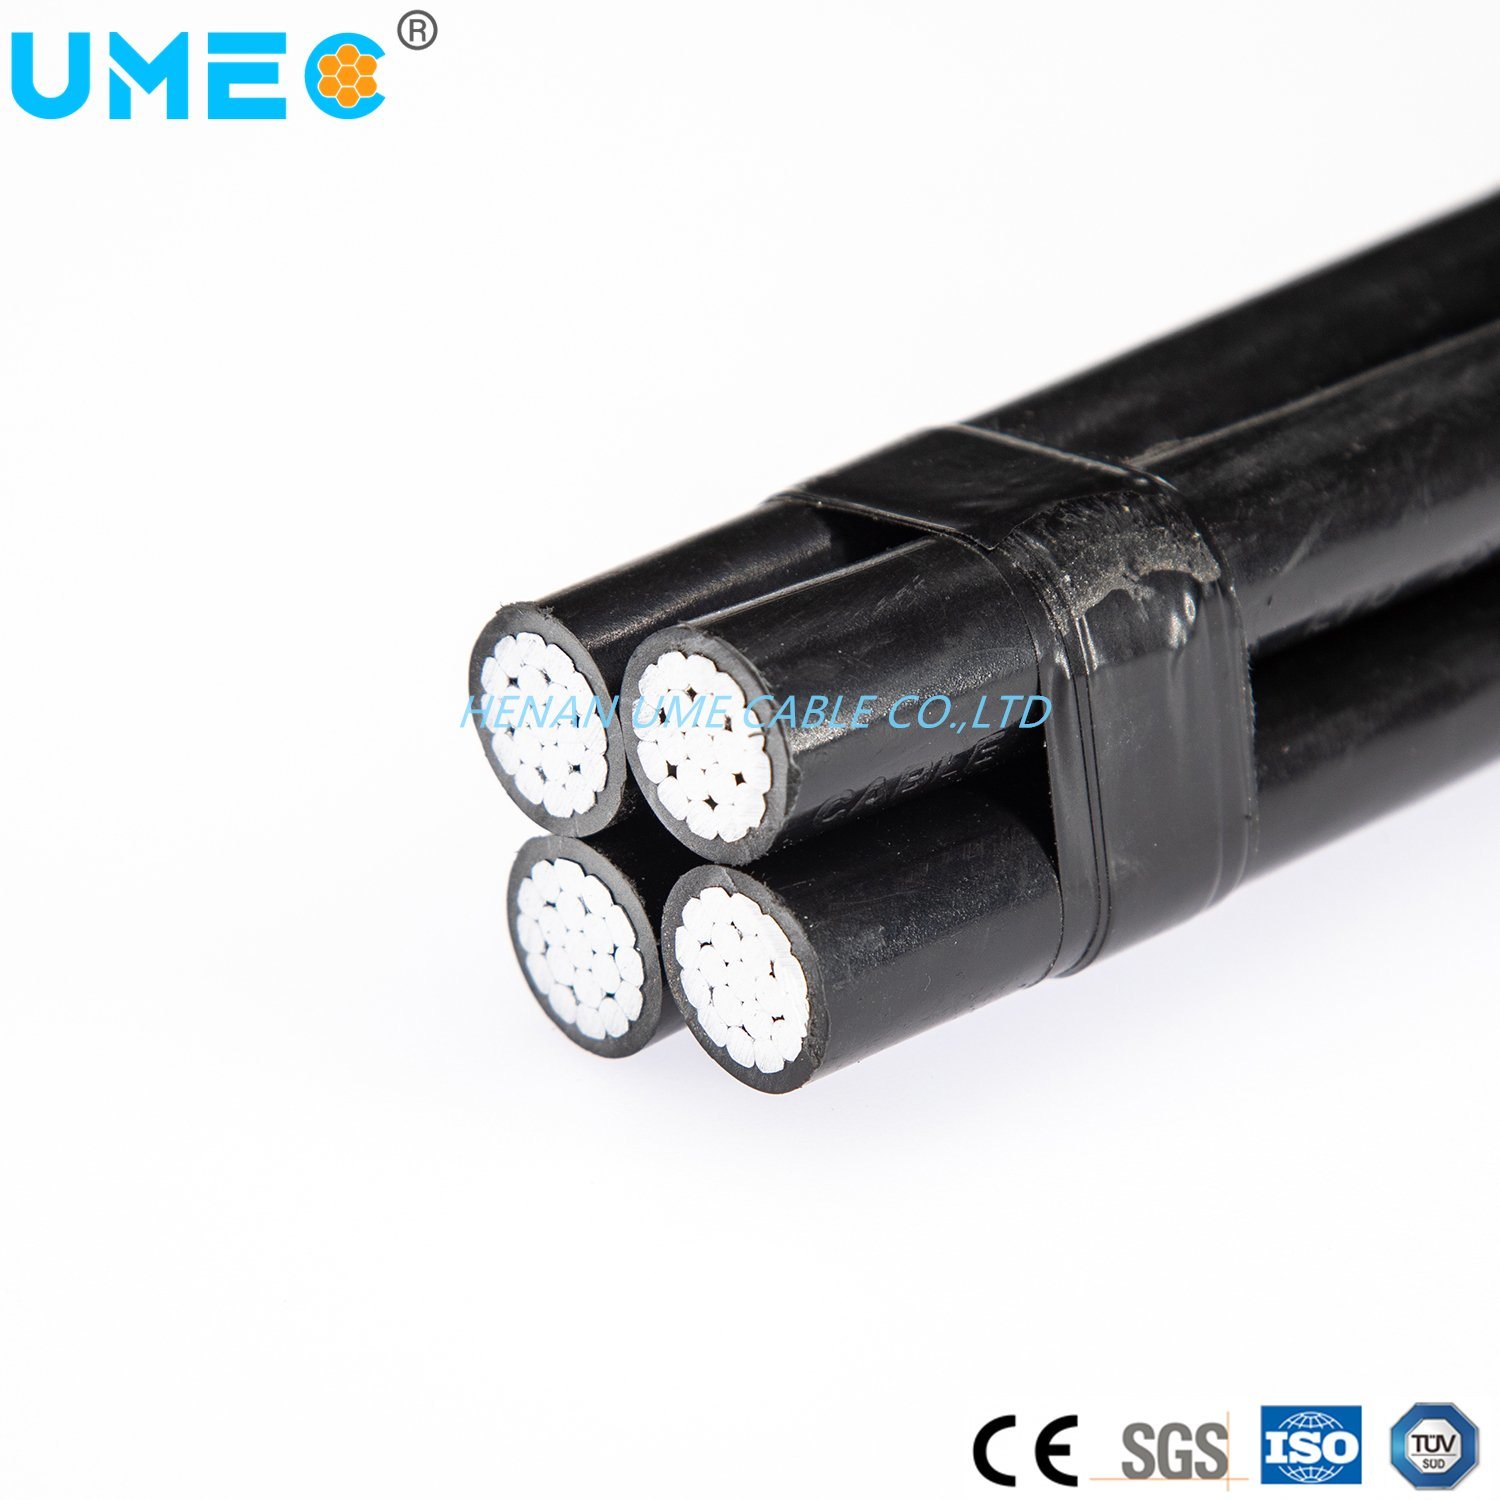 Electrical Overhead Service Drop Cable ABC Cable Quadruplex Service Drop Cable